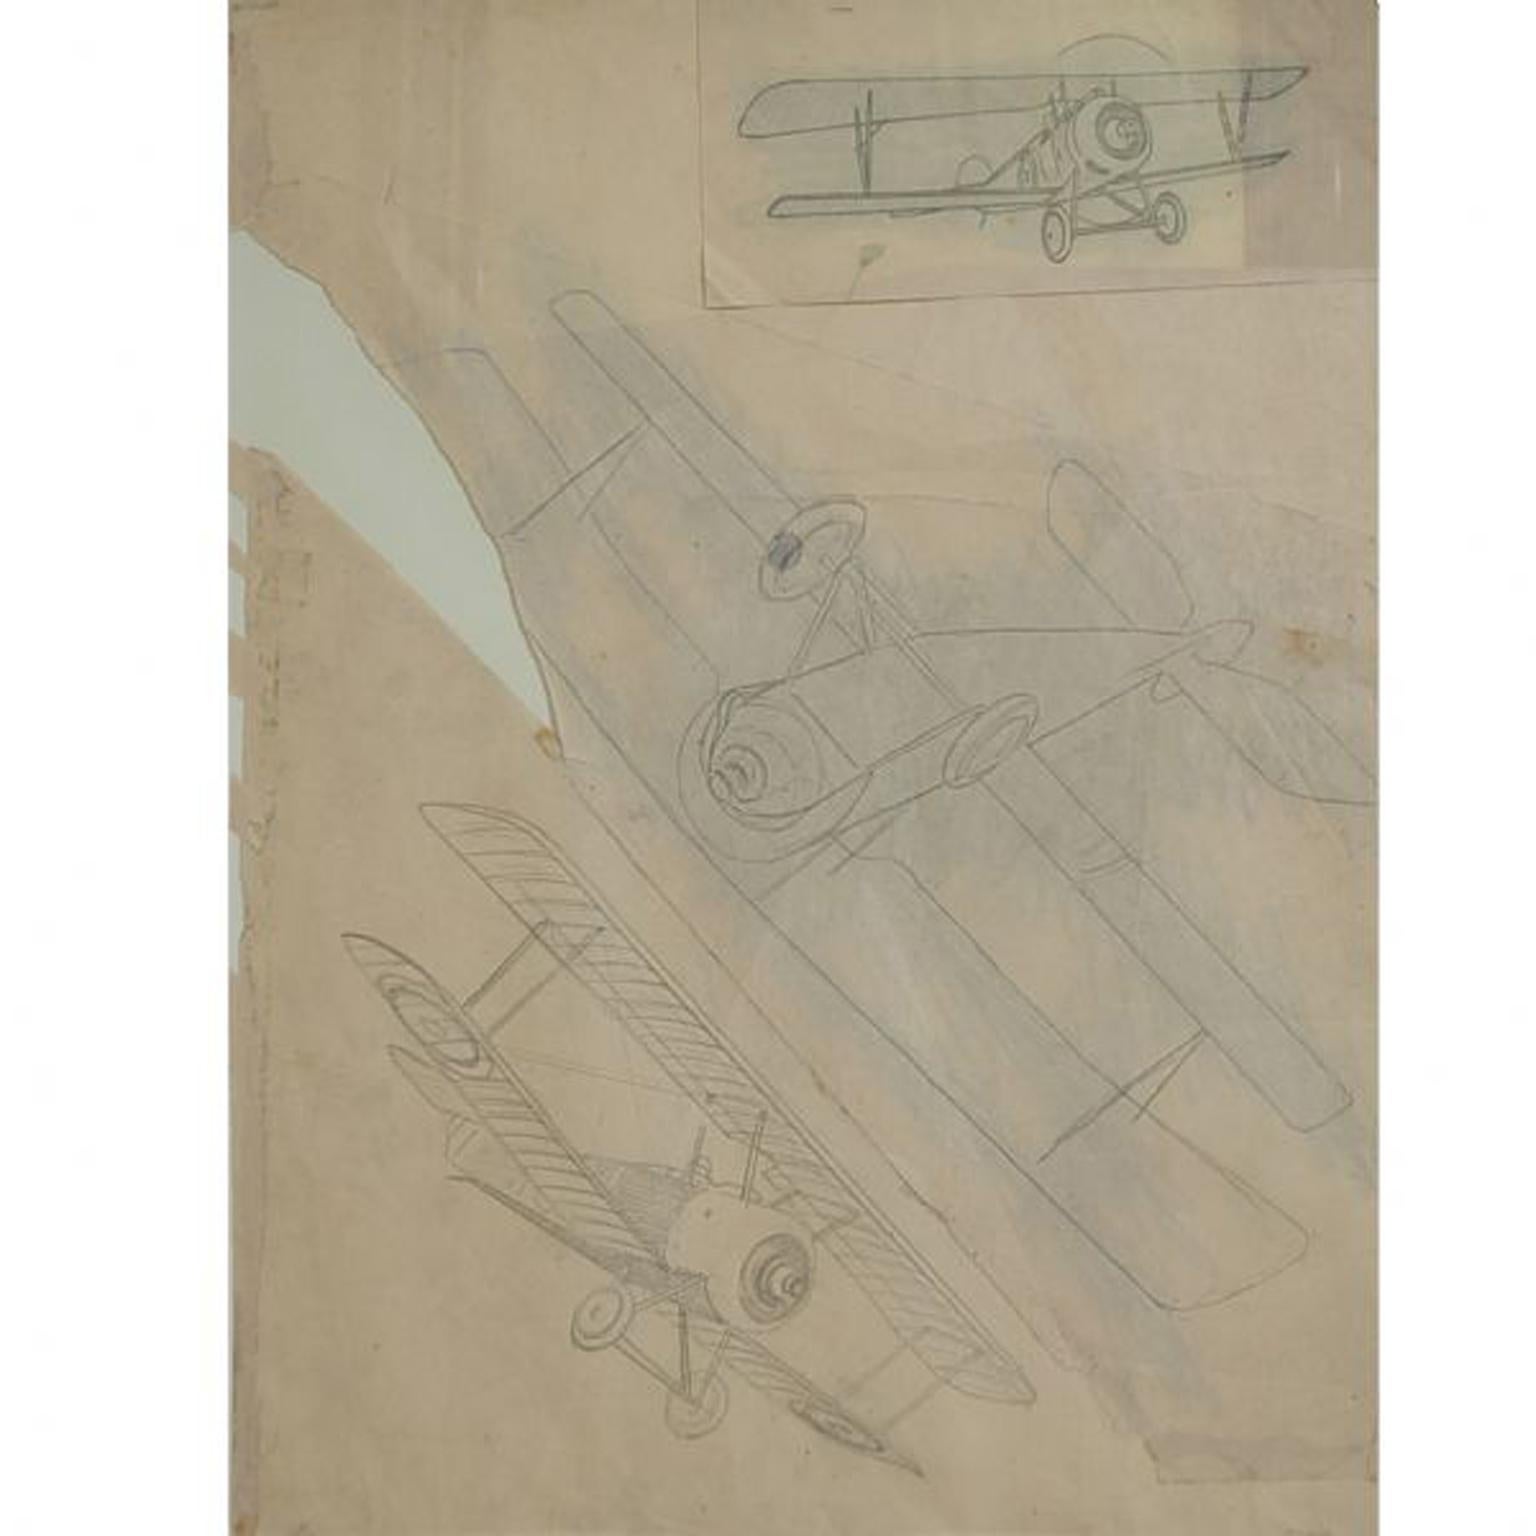 Pencil drawing drawn by Riccardo Cavigioli in the early 1920s representing three single-seat biplane airplanes. Right= two single seat biplane fighter Nieuport 11 Bebe of 1915. Left (low)= single-seat biplane fighter SPAD VII, 1916. Measure with